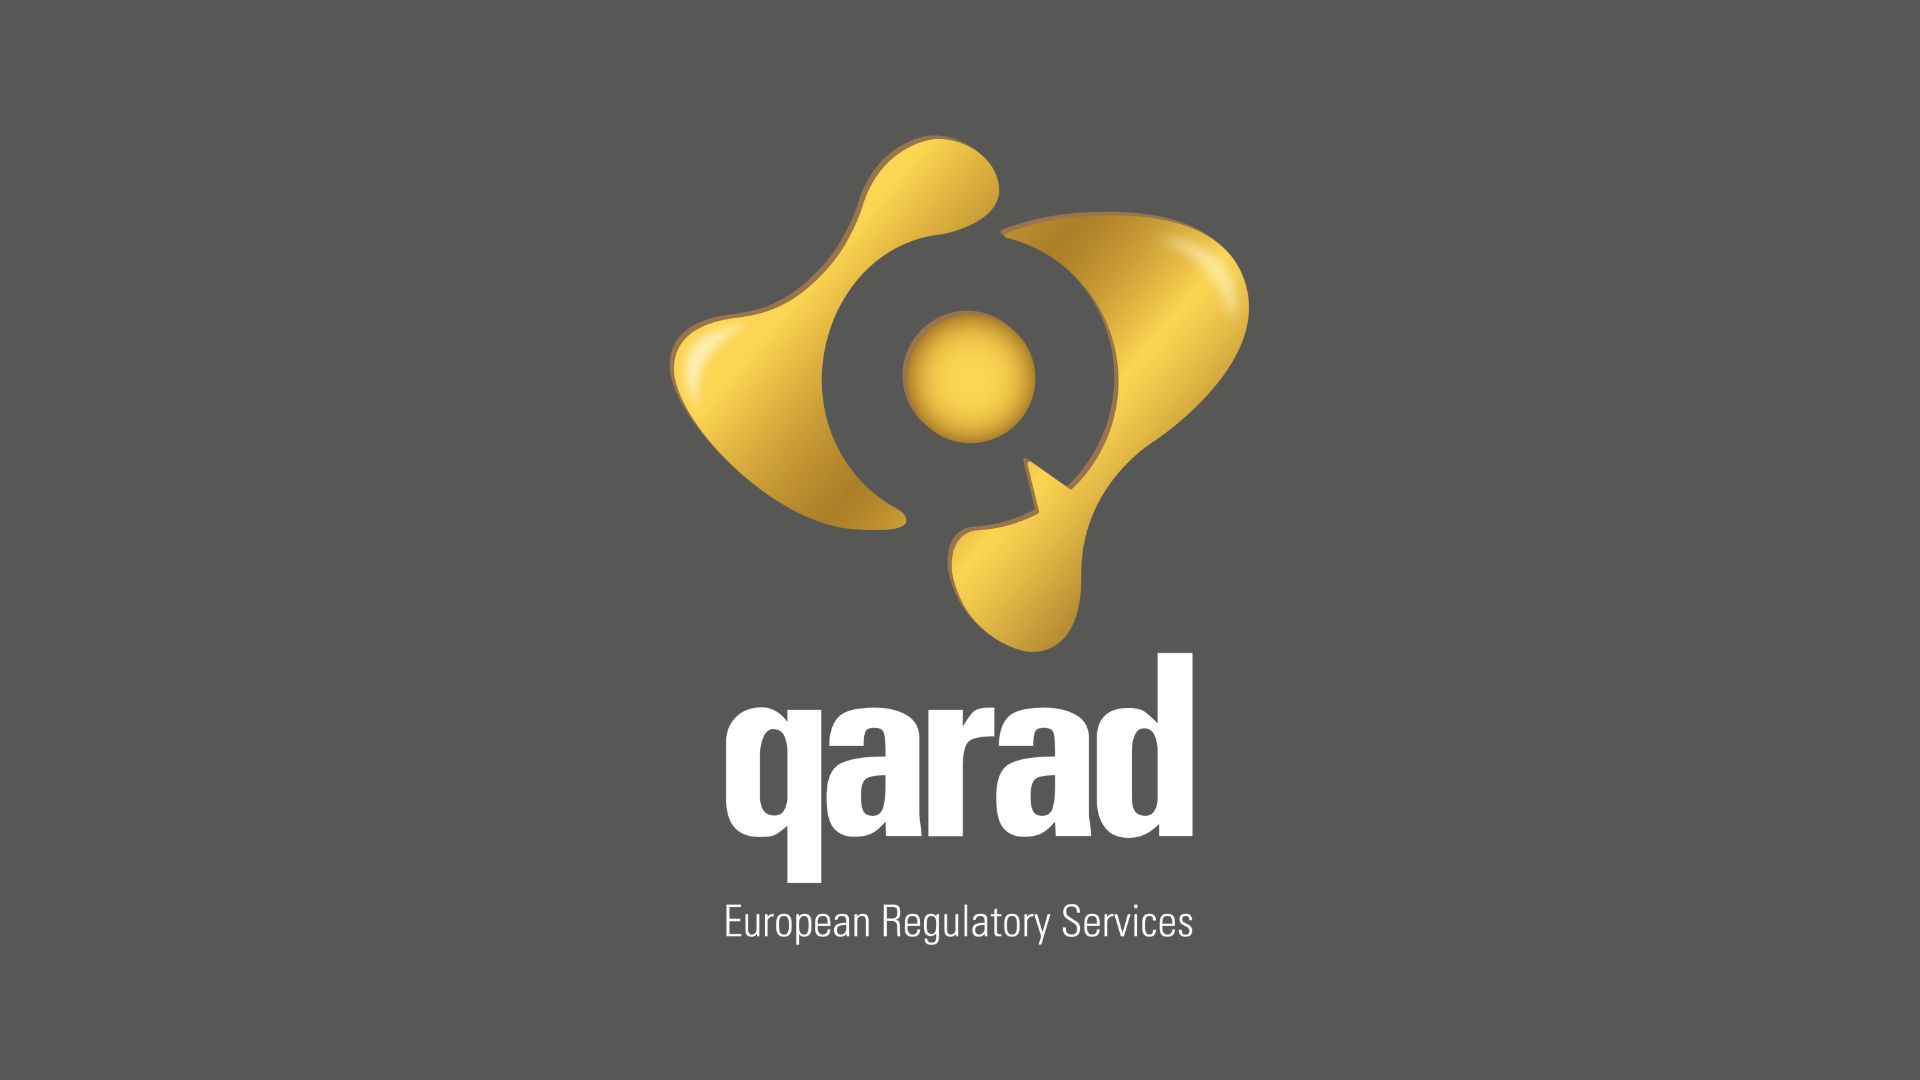 The Qarad touch: how a commitment to customer support spells success for IVD and medical device customers